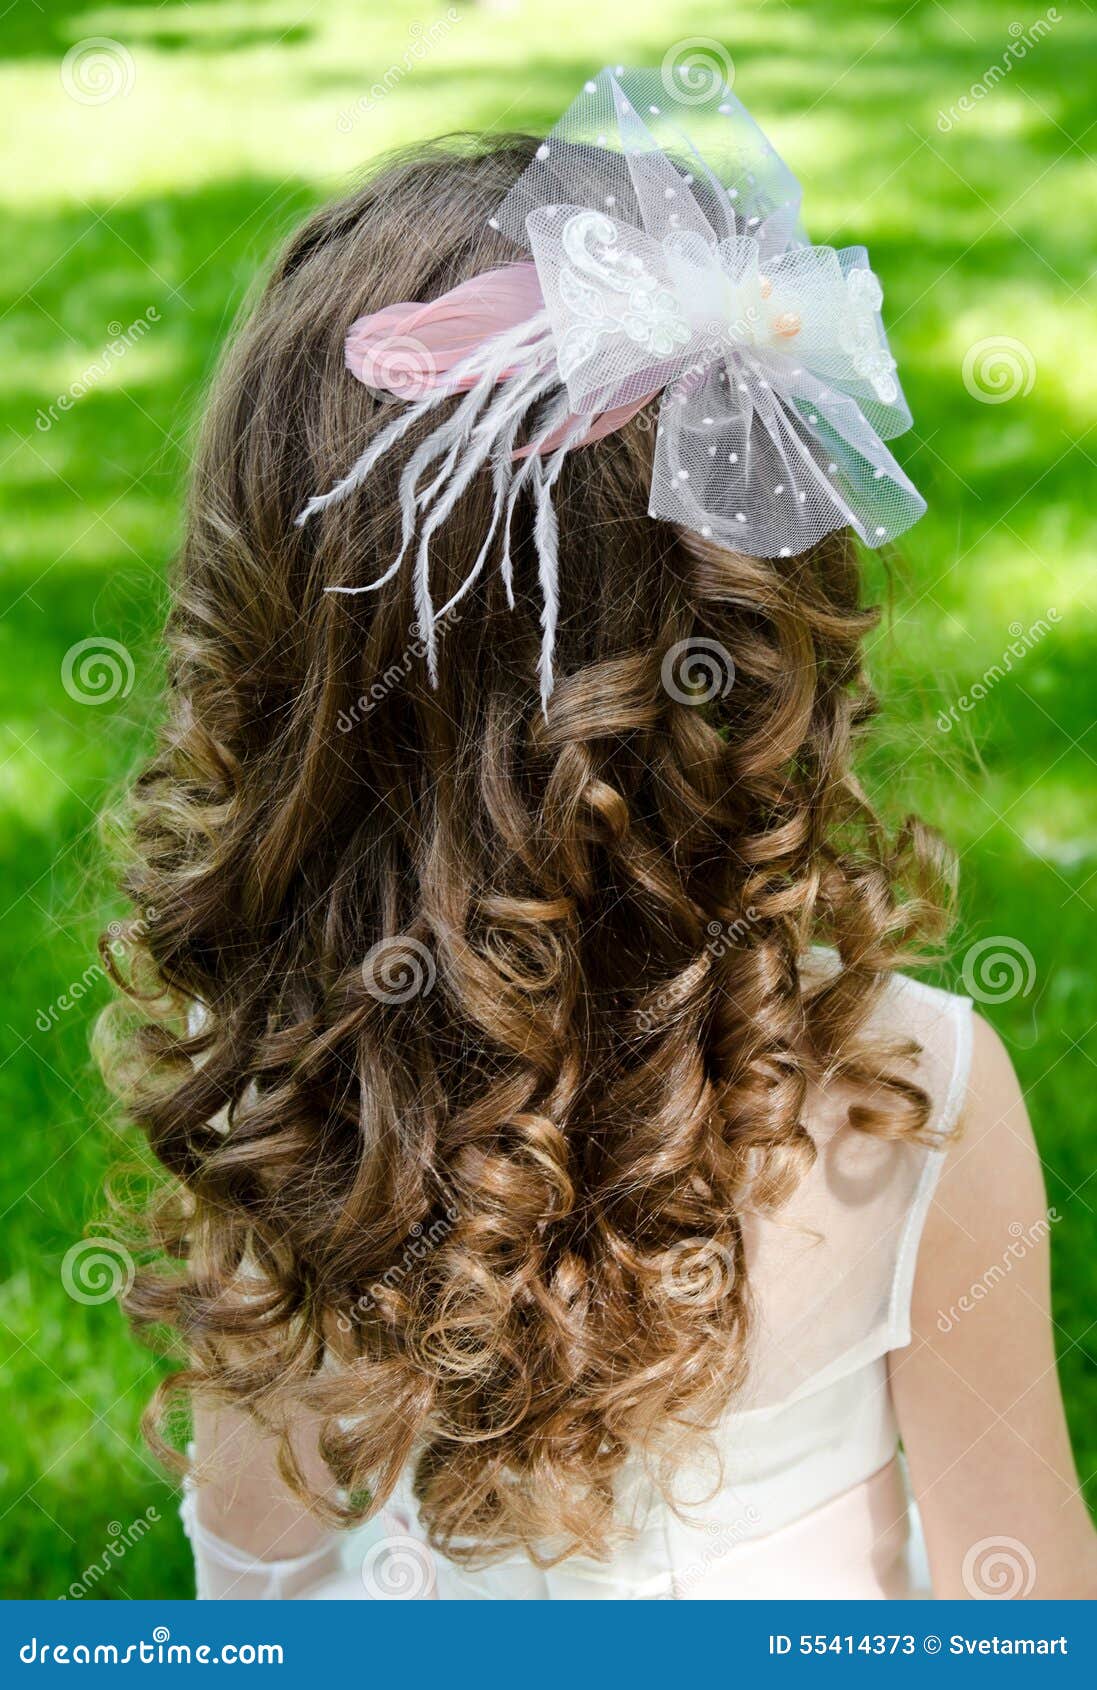 3 Wedding Hairstyle Ideas With That Woodland Fairy Princess Vibe | Glamour